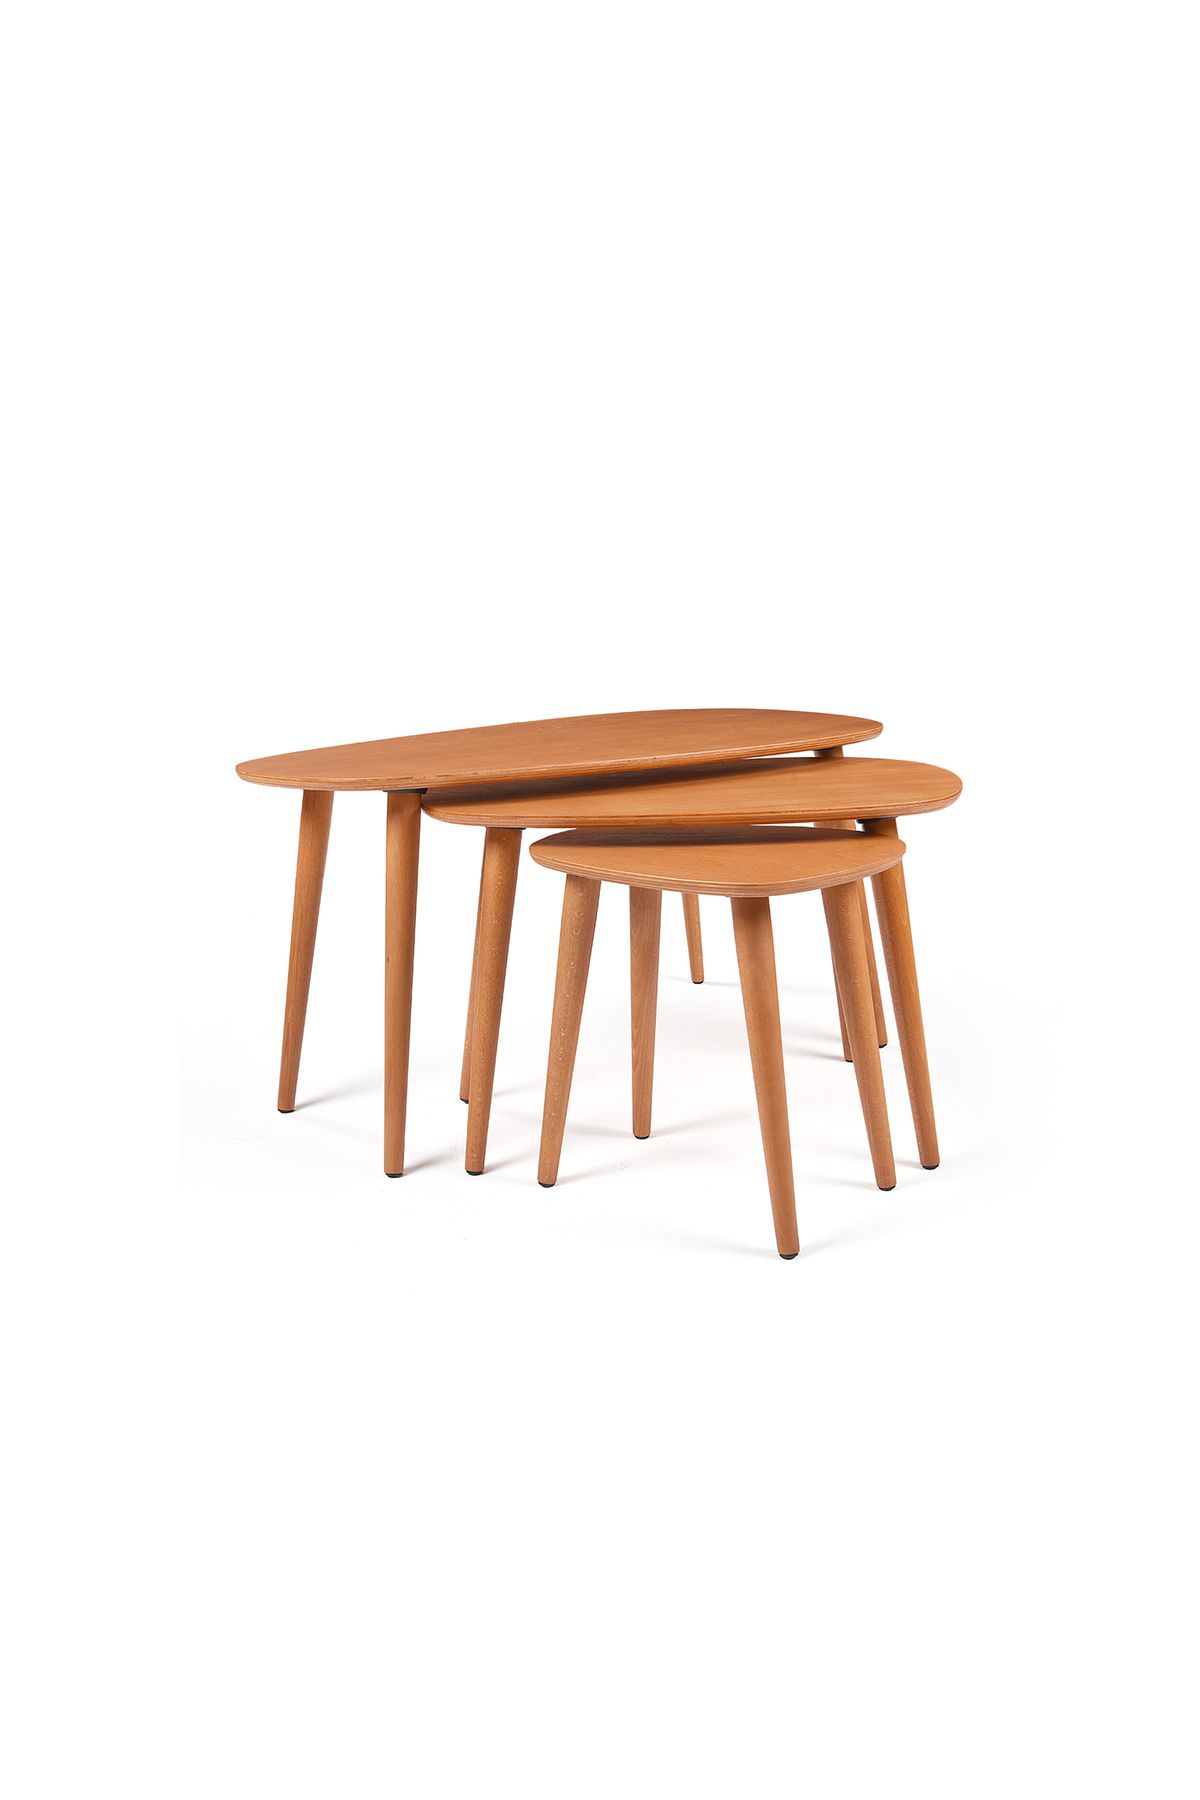 EntWood Design Rohan Orta Sehpa Small